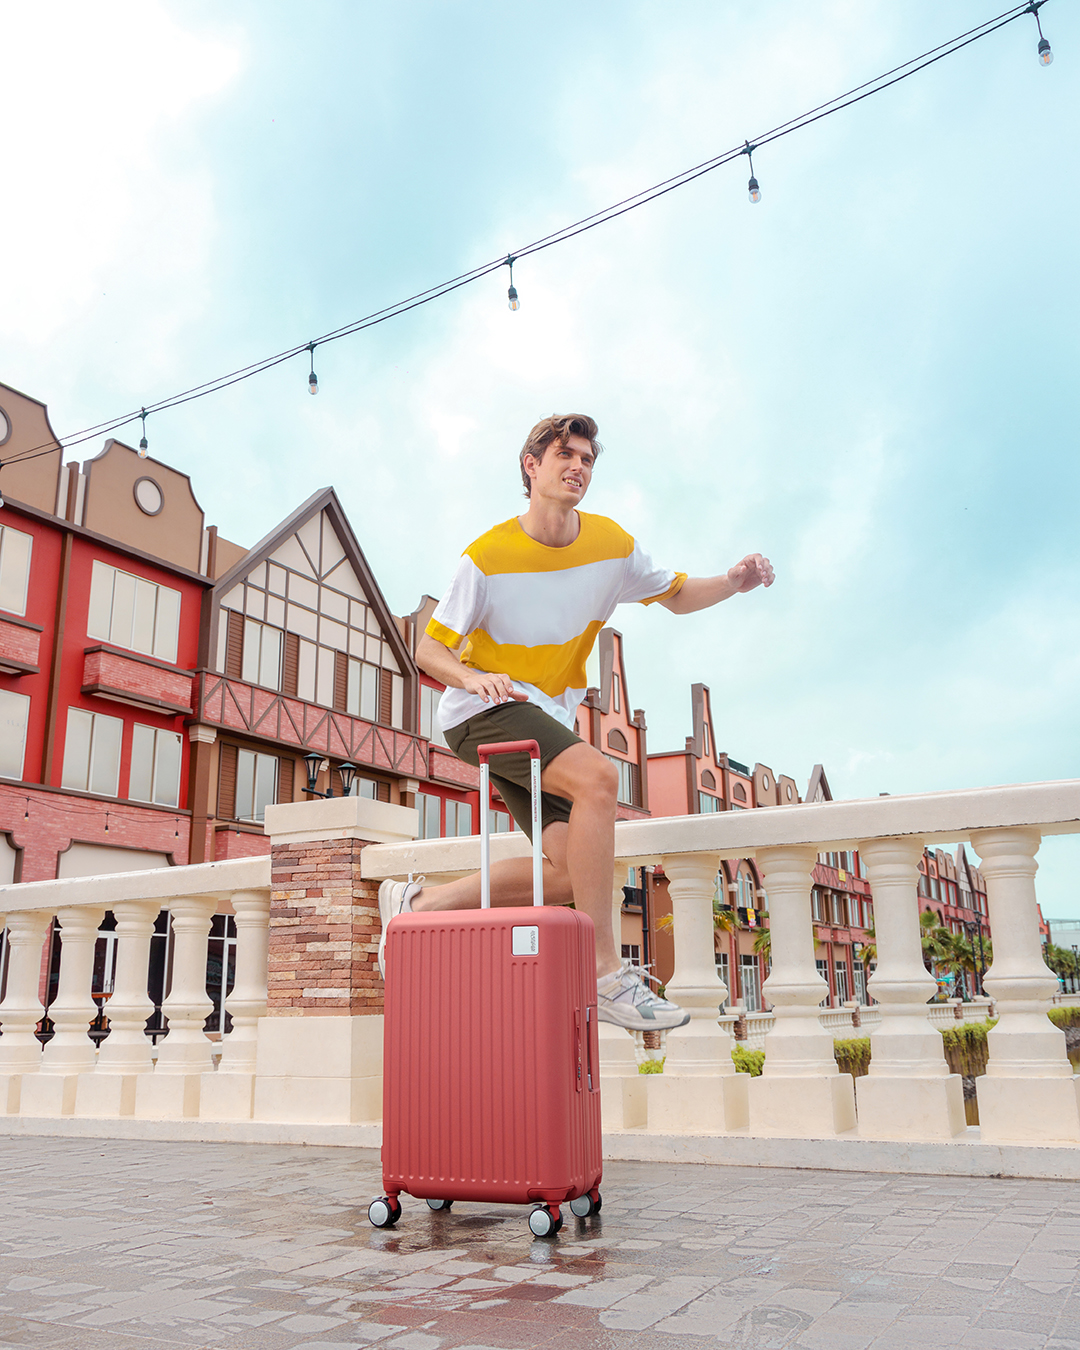   lifestyle | American Tourister